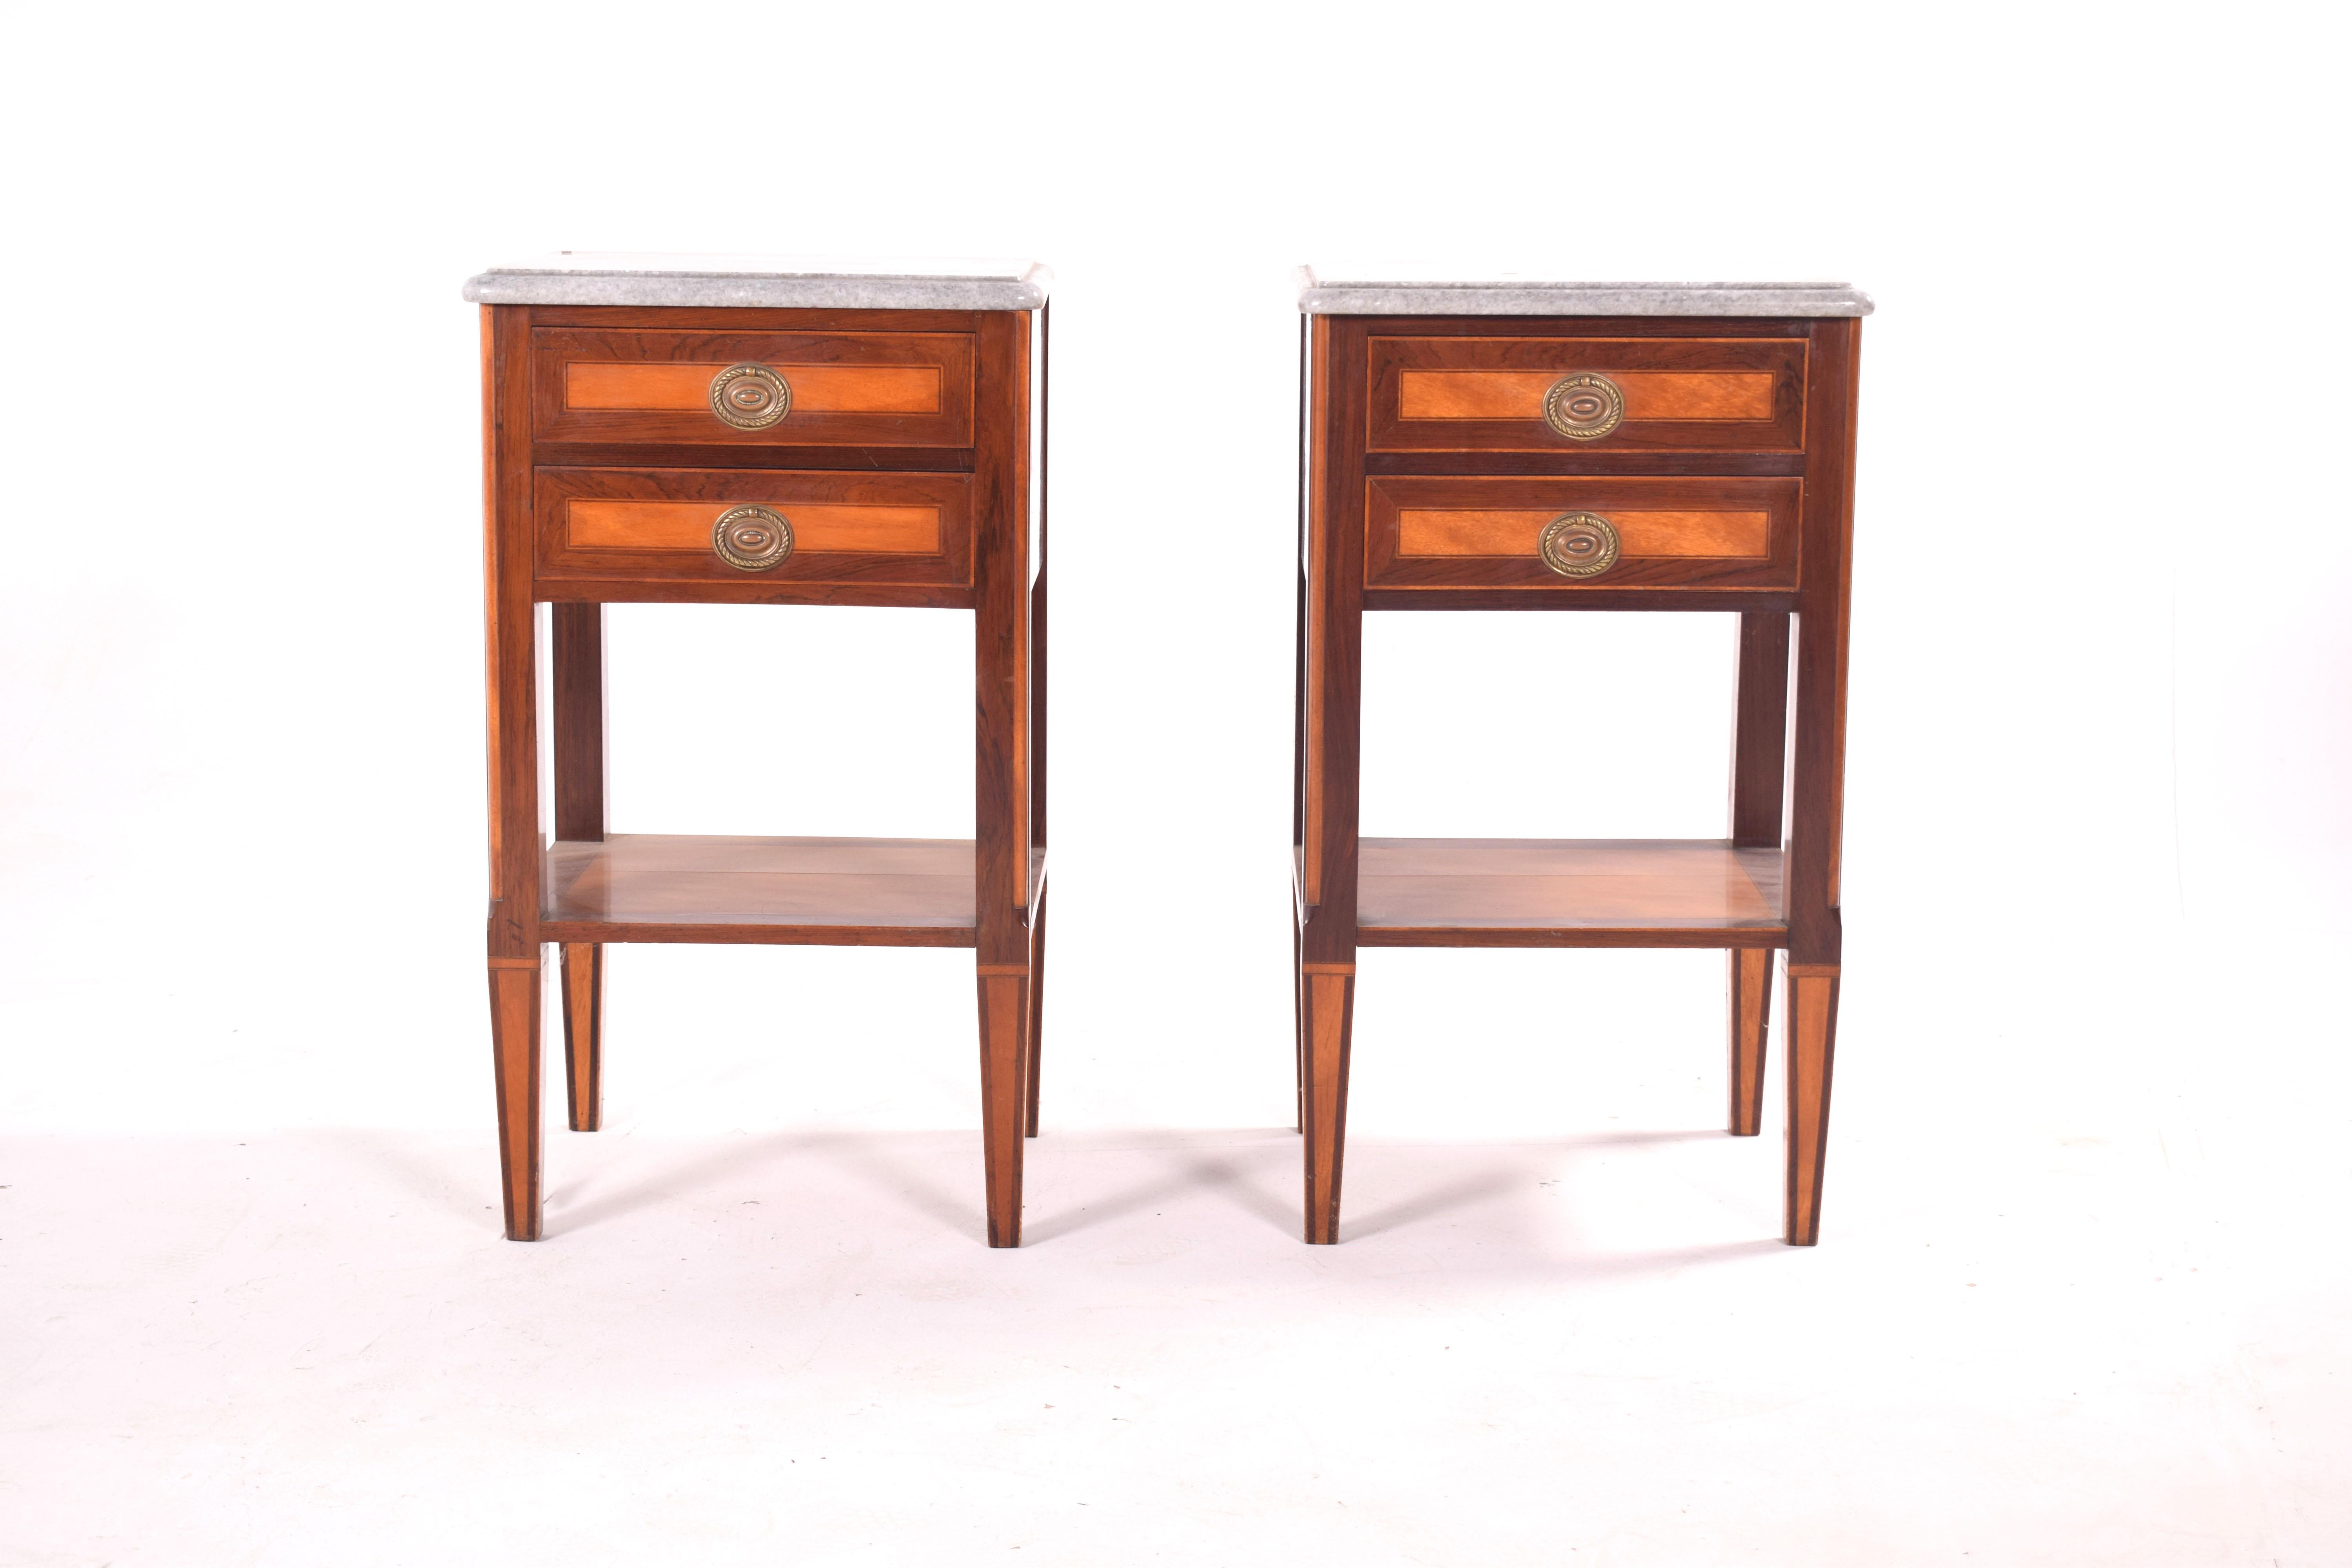 Two D. Maria style bedside tables with gray stone top. Ash, walnut and rosewood. Two drawers.
  